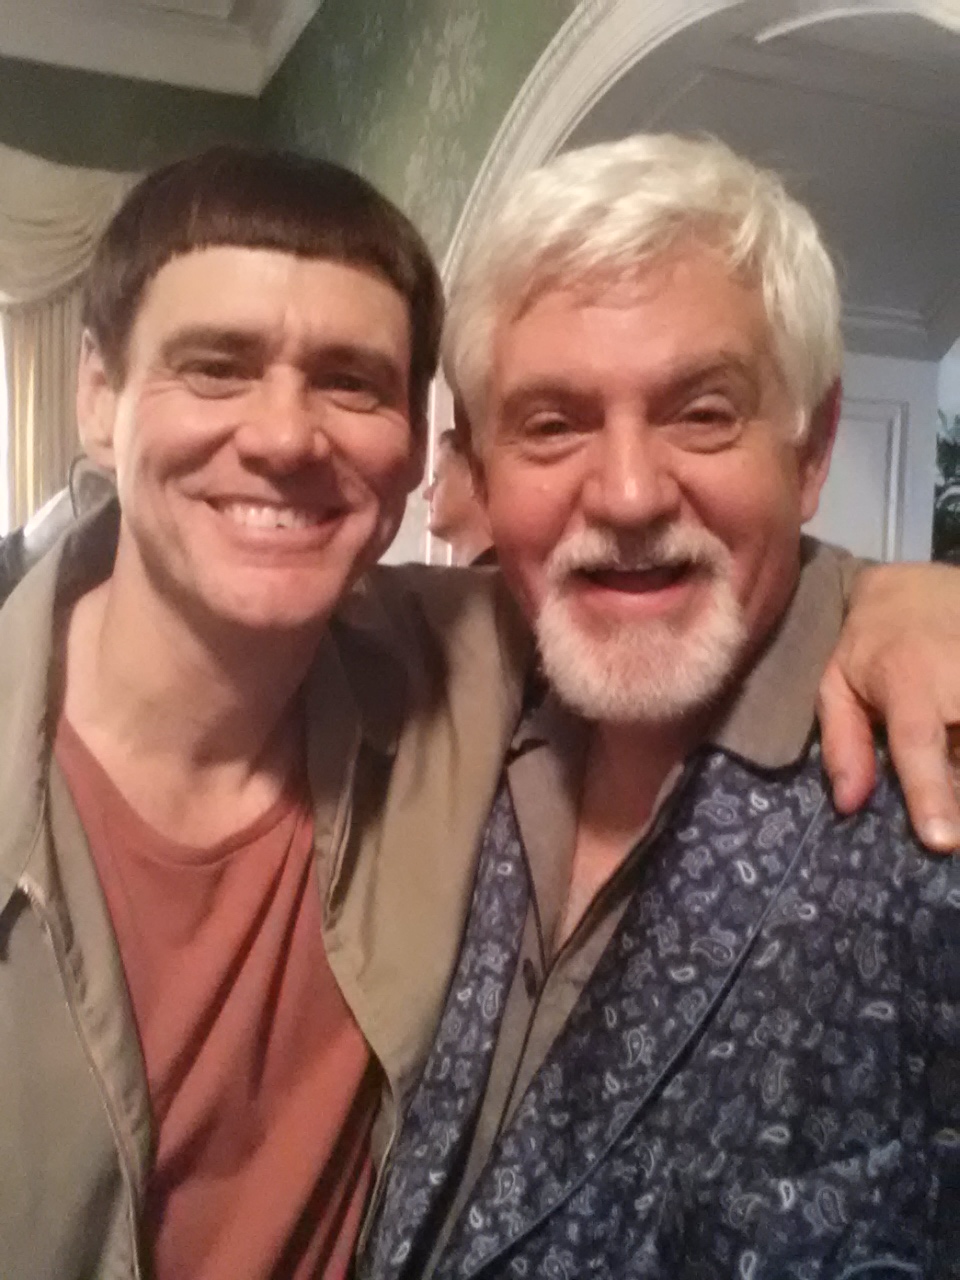 With Jim Carrey while shooting Dumb and Dumber To, Oct/Nov 2013